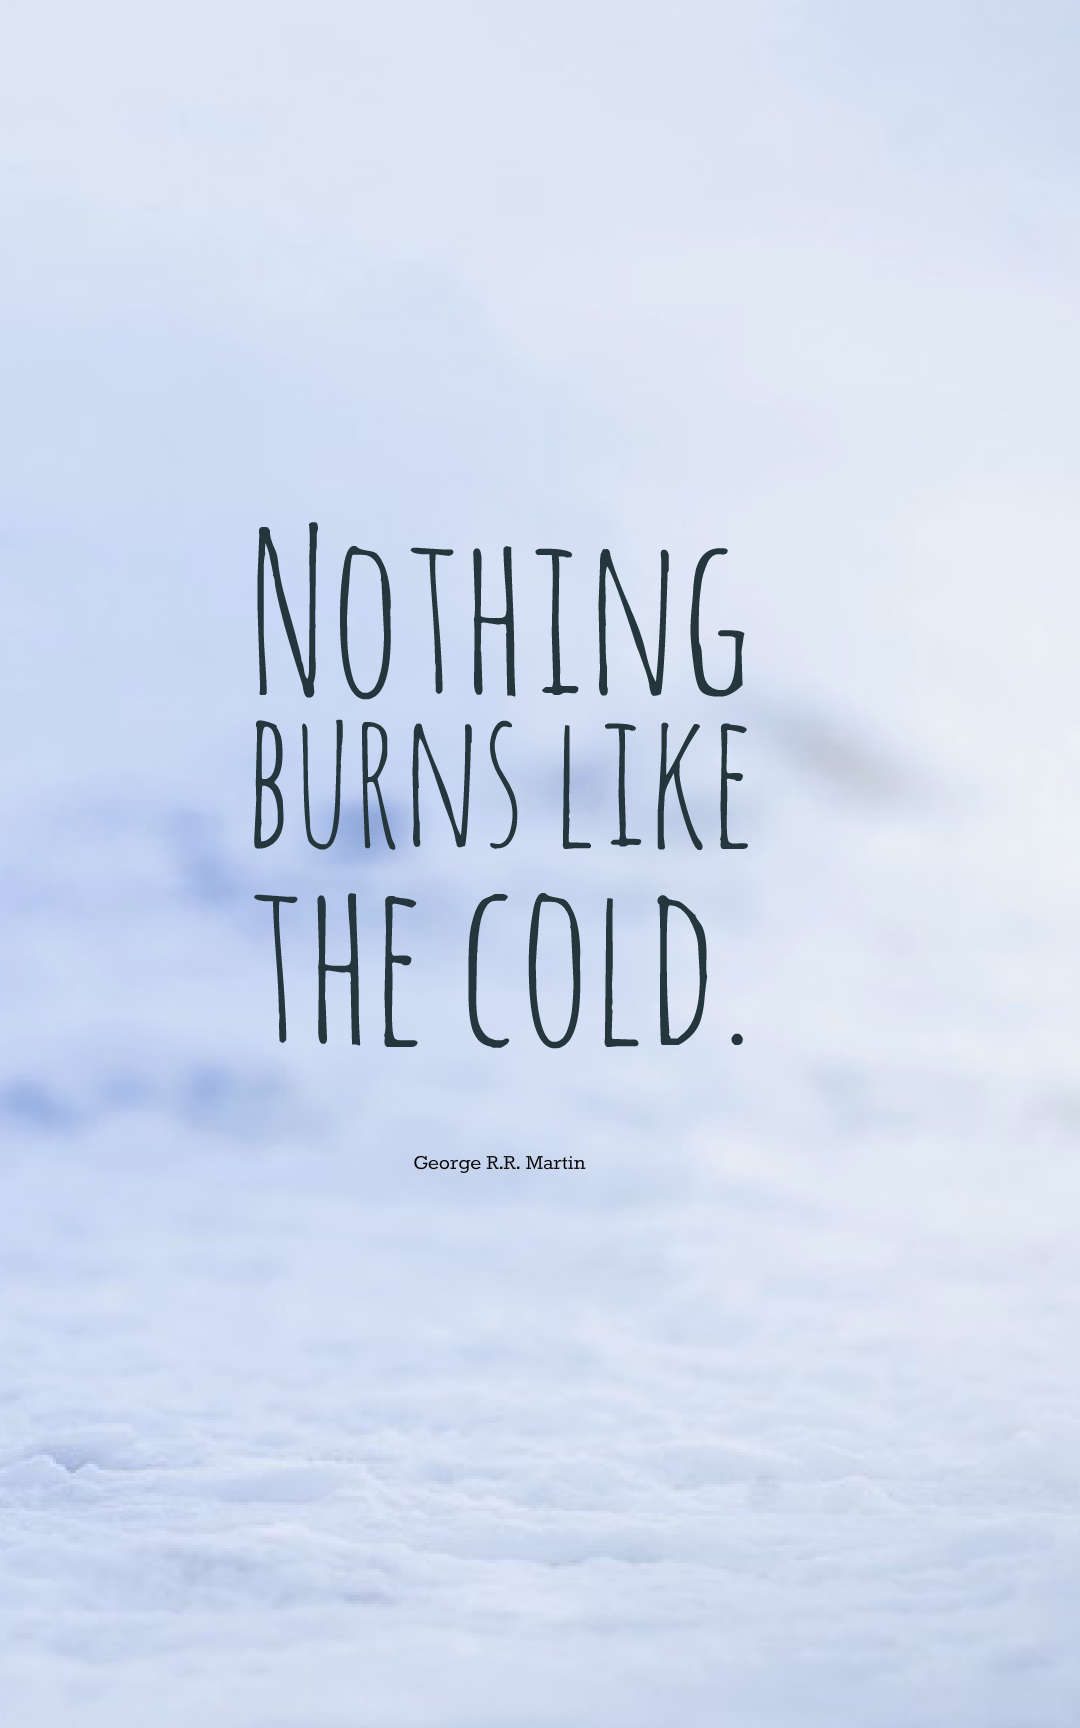 Nothing burns like the cold.